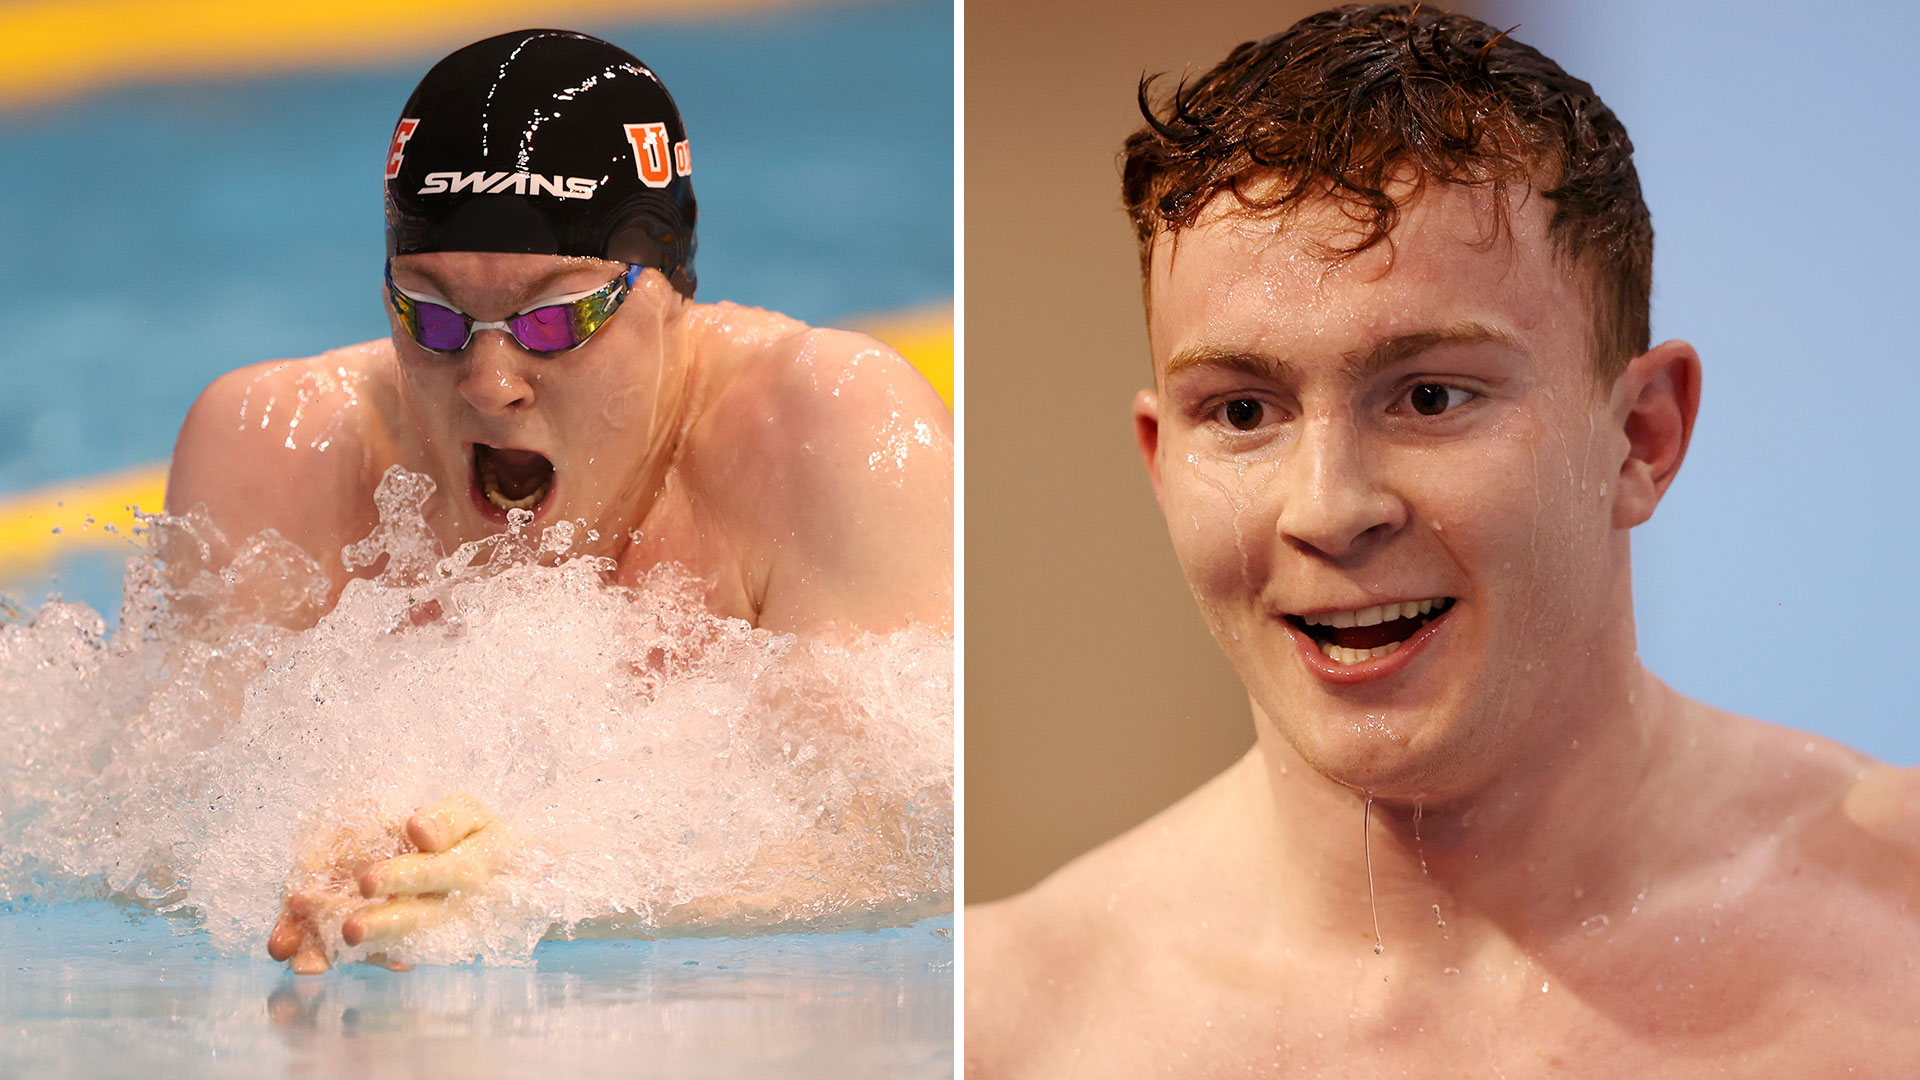 Team GB swimmer Archie Goodburn, 23, diagnosed with incurable brain tumour as he posts heartbreaking health update [Video]